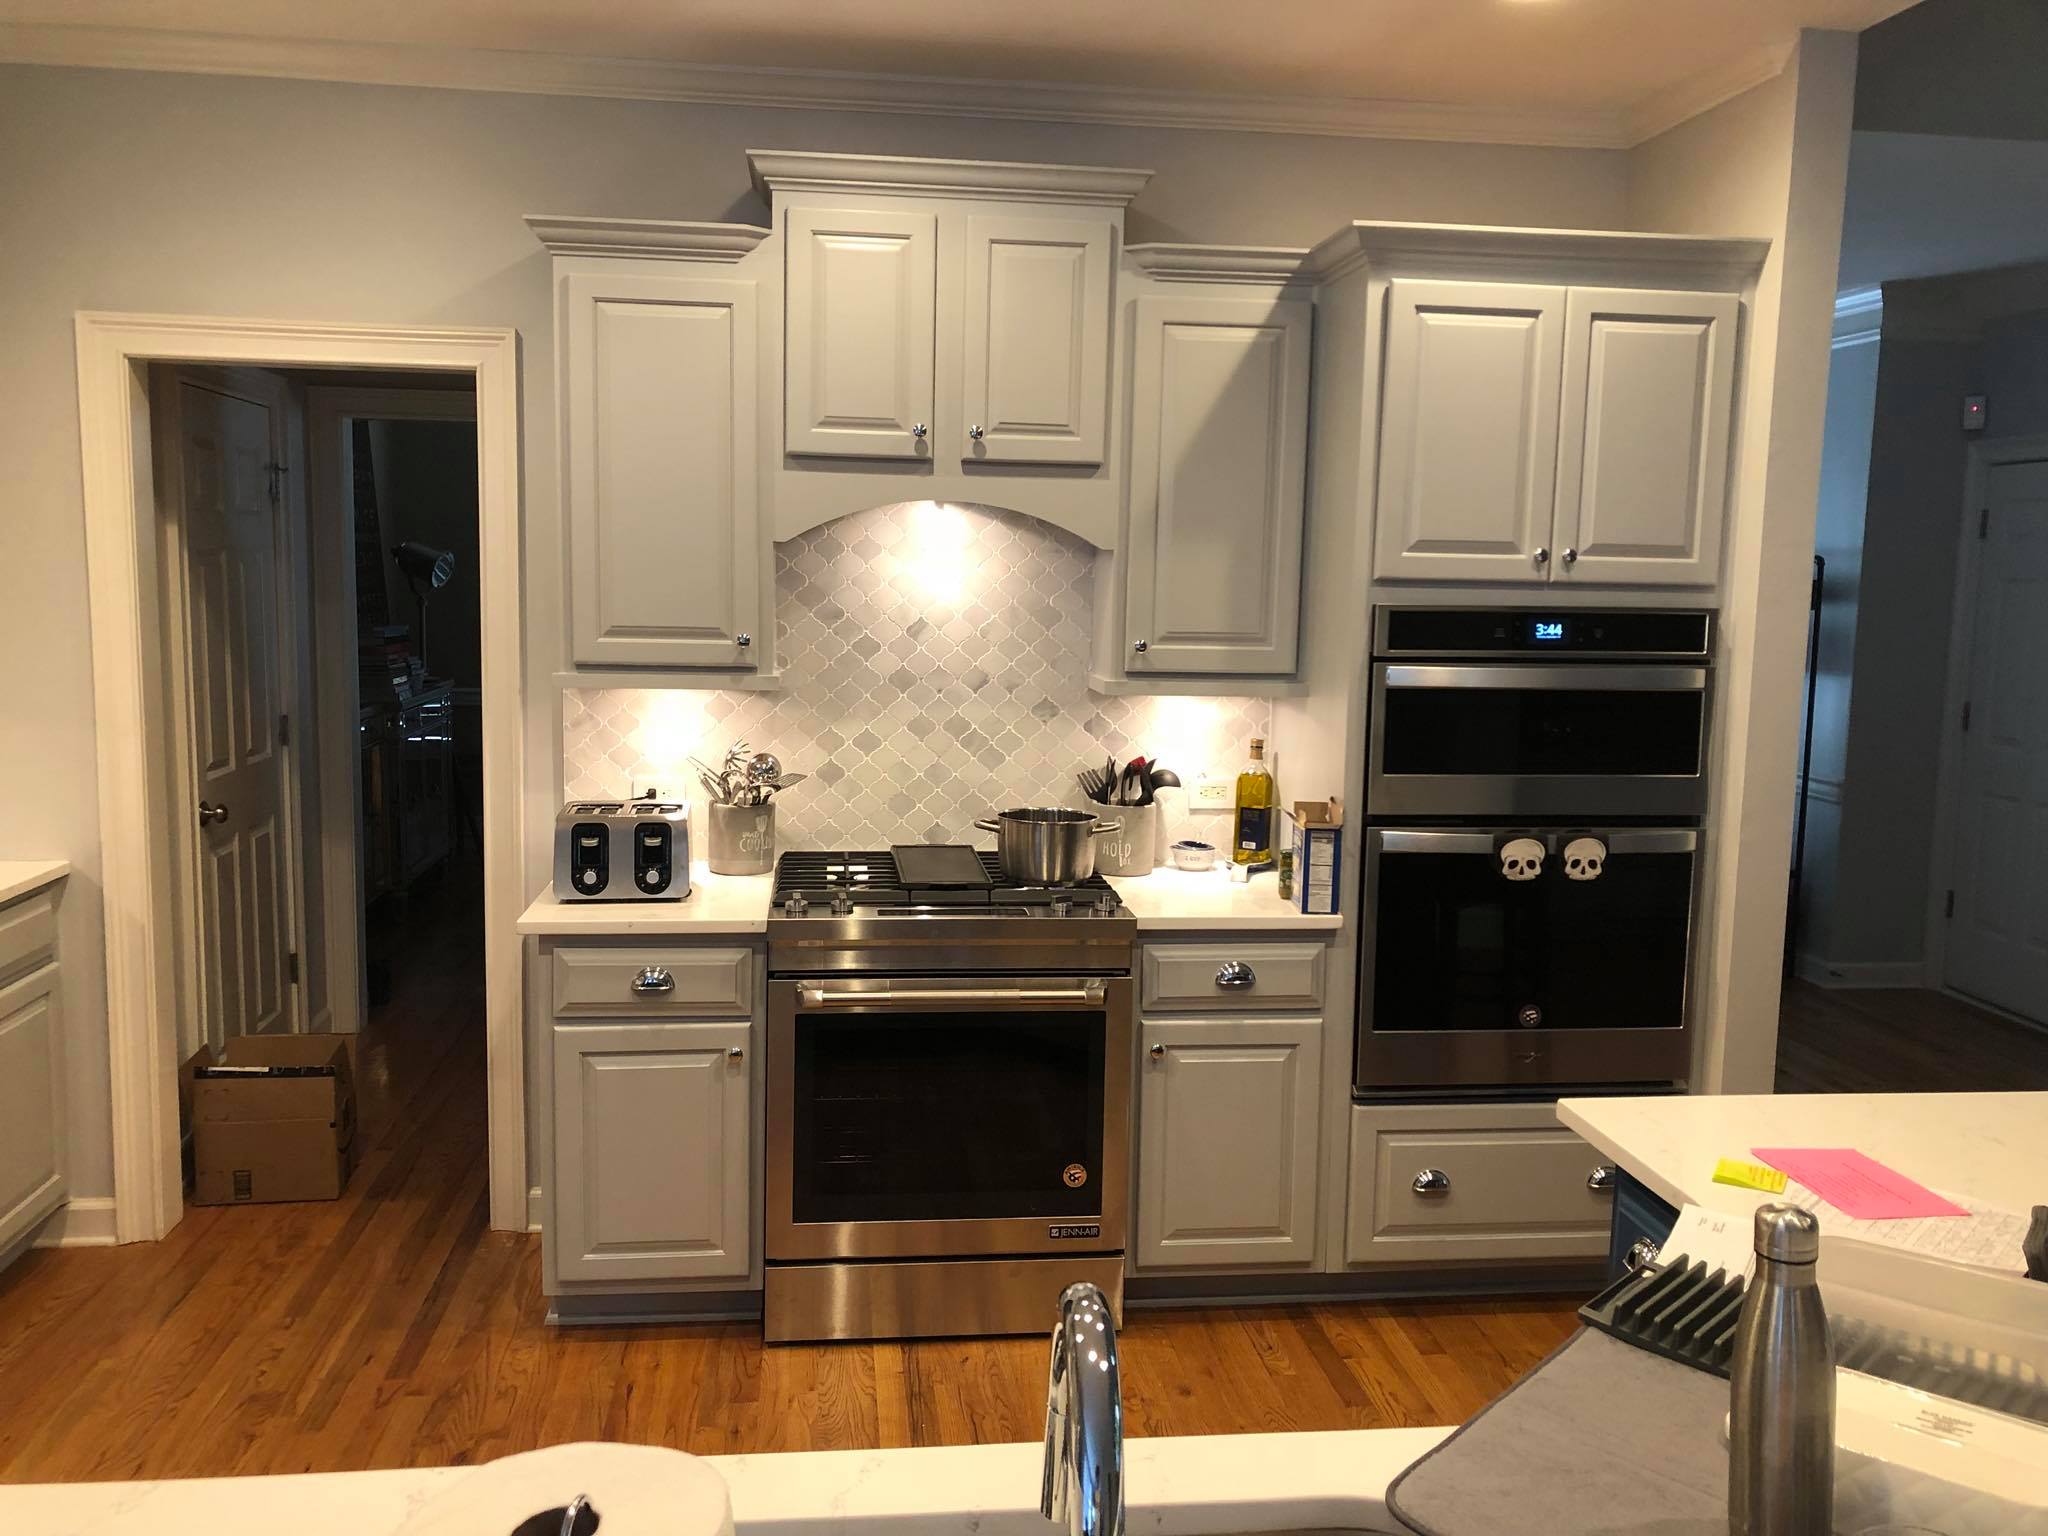 Full Kitchen Remodeling with New Painted Cabinets 2